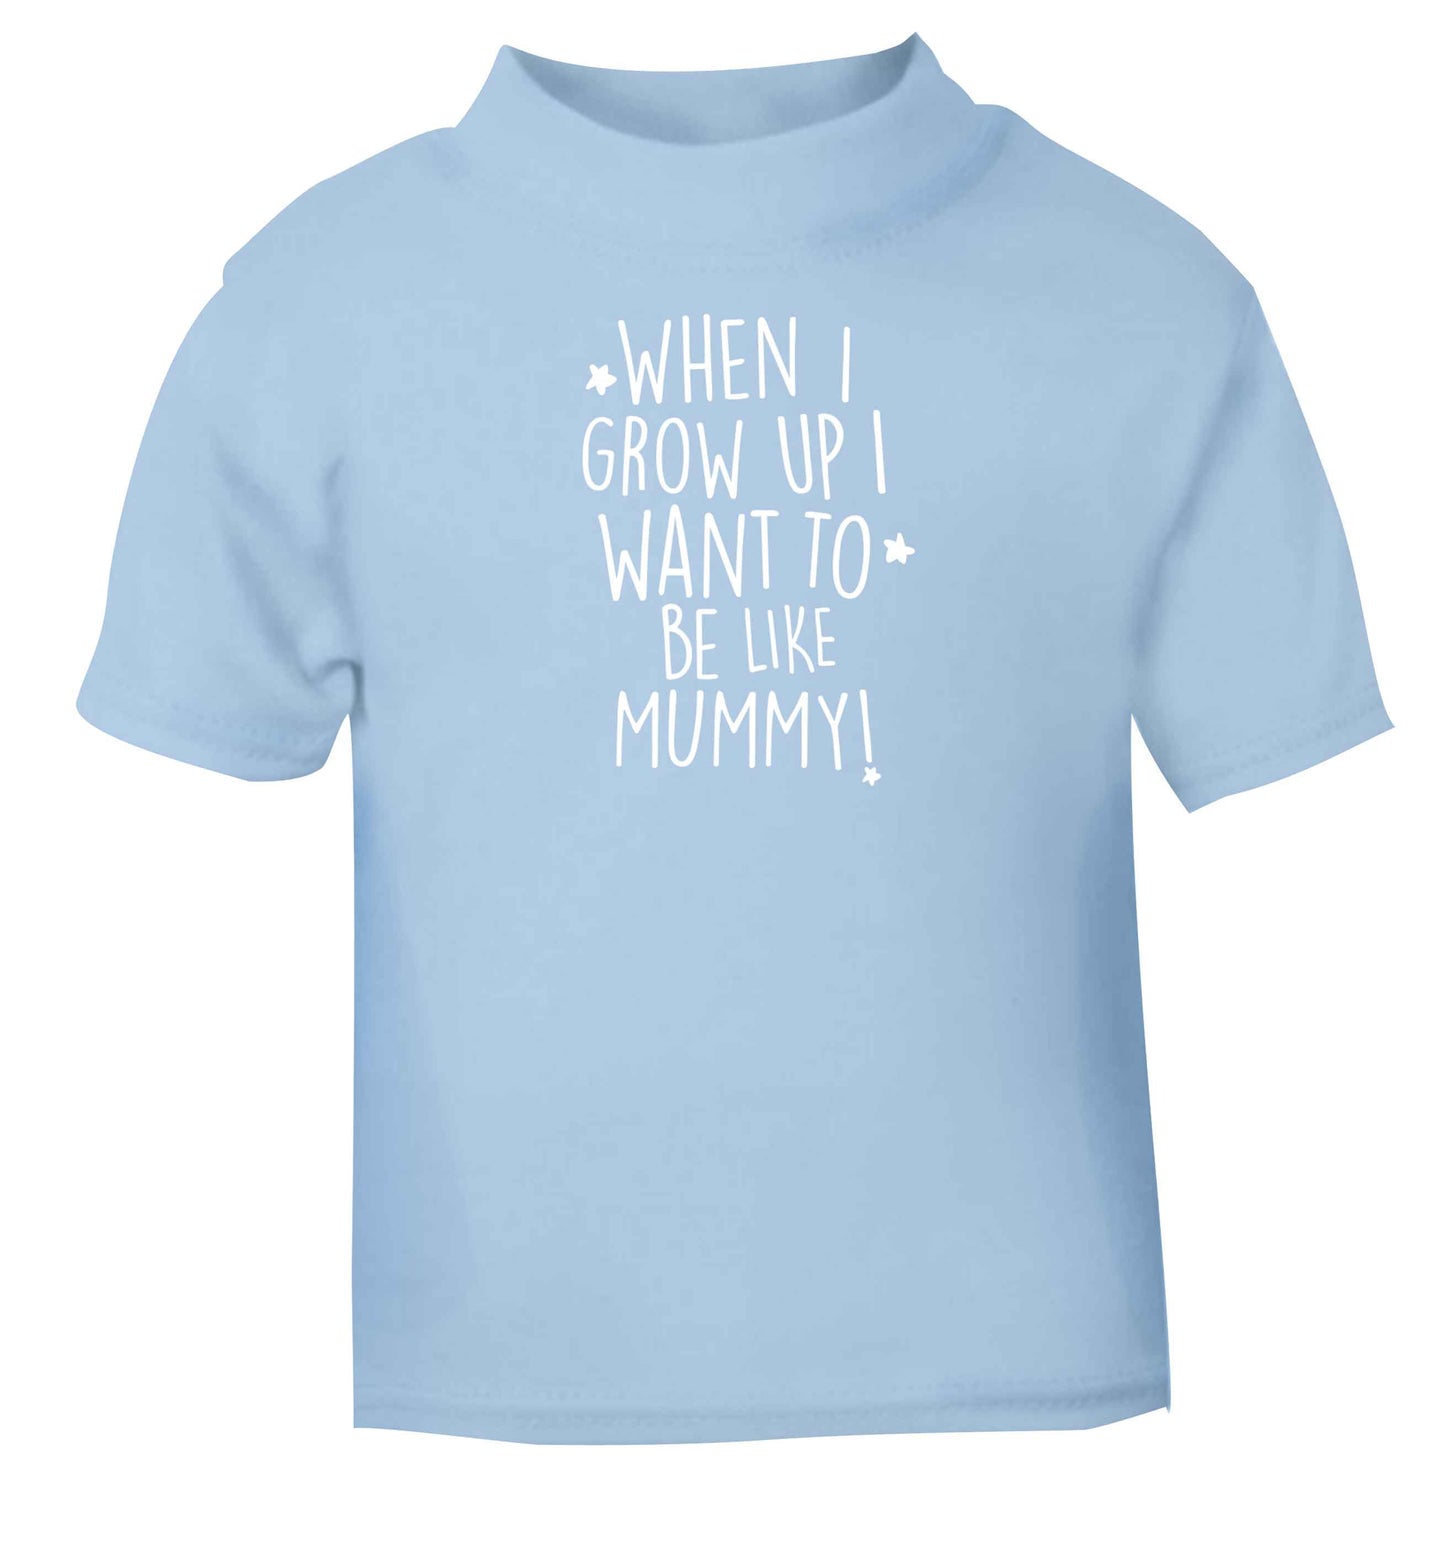 When I grow up I want to be like my mummy light blue baby toddler Tshirt 2 Years